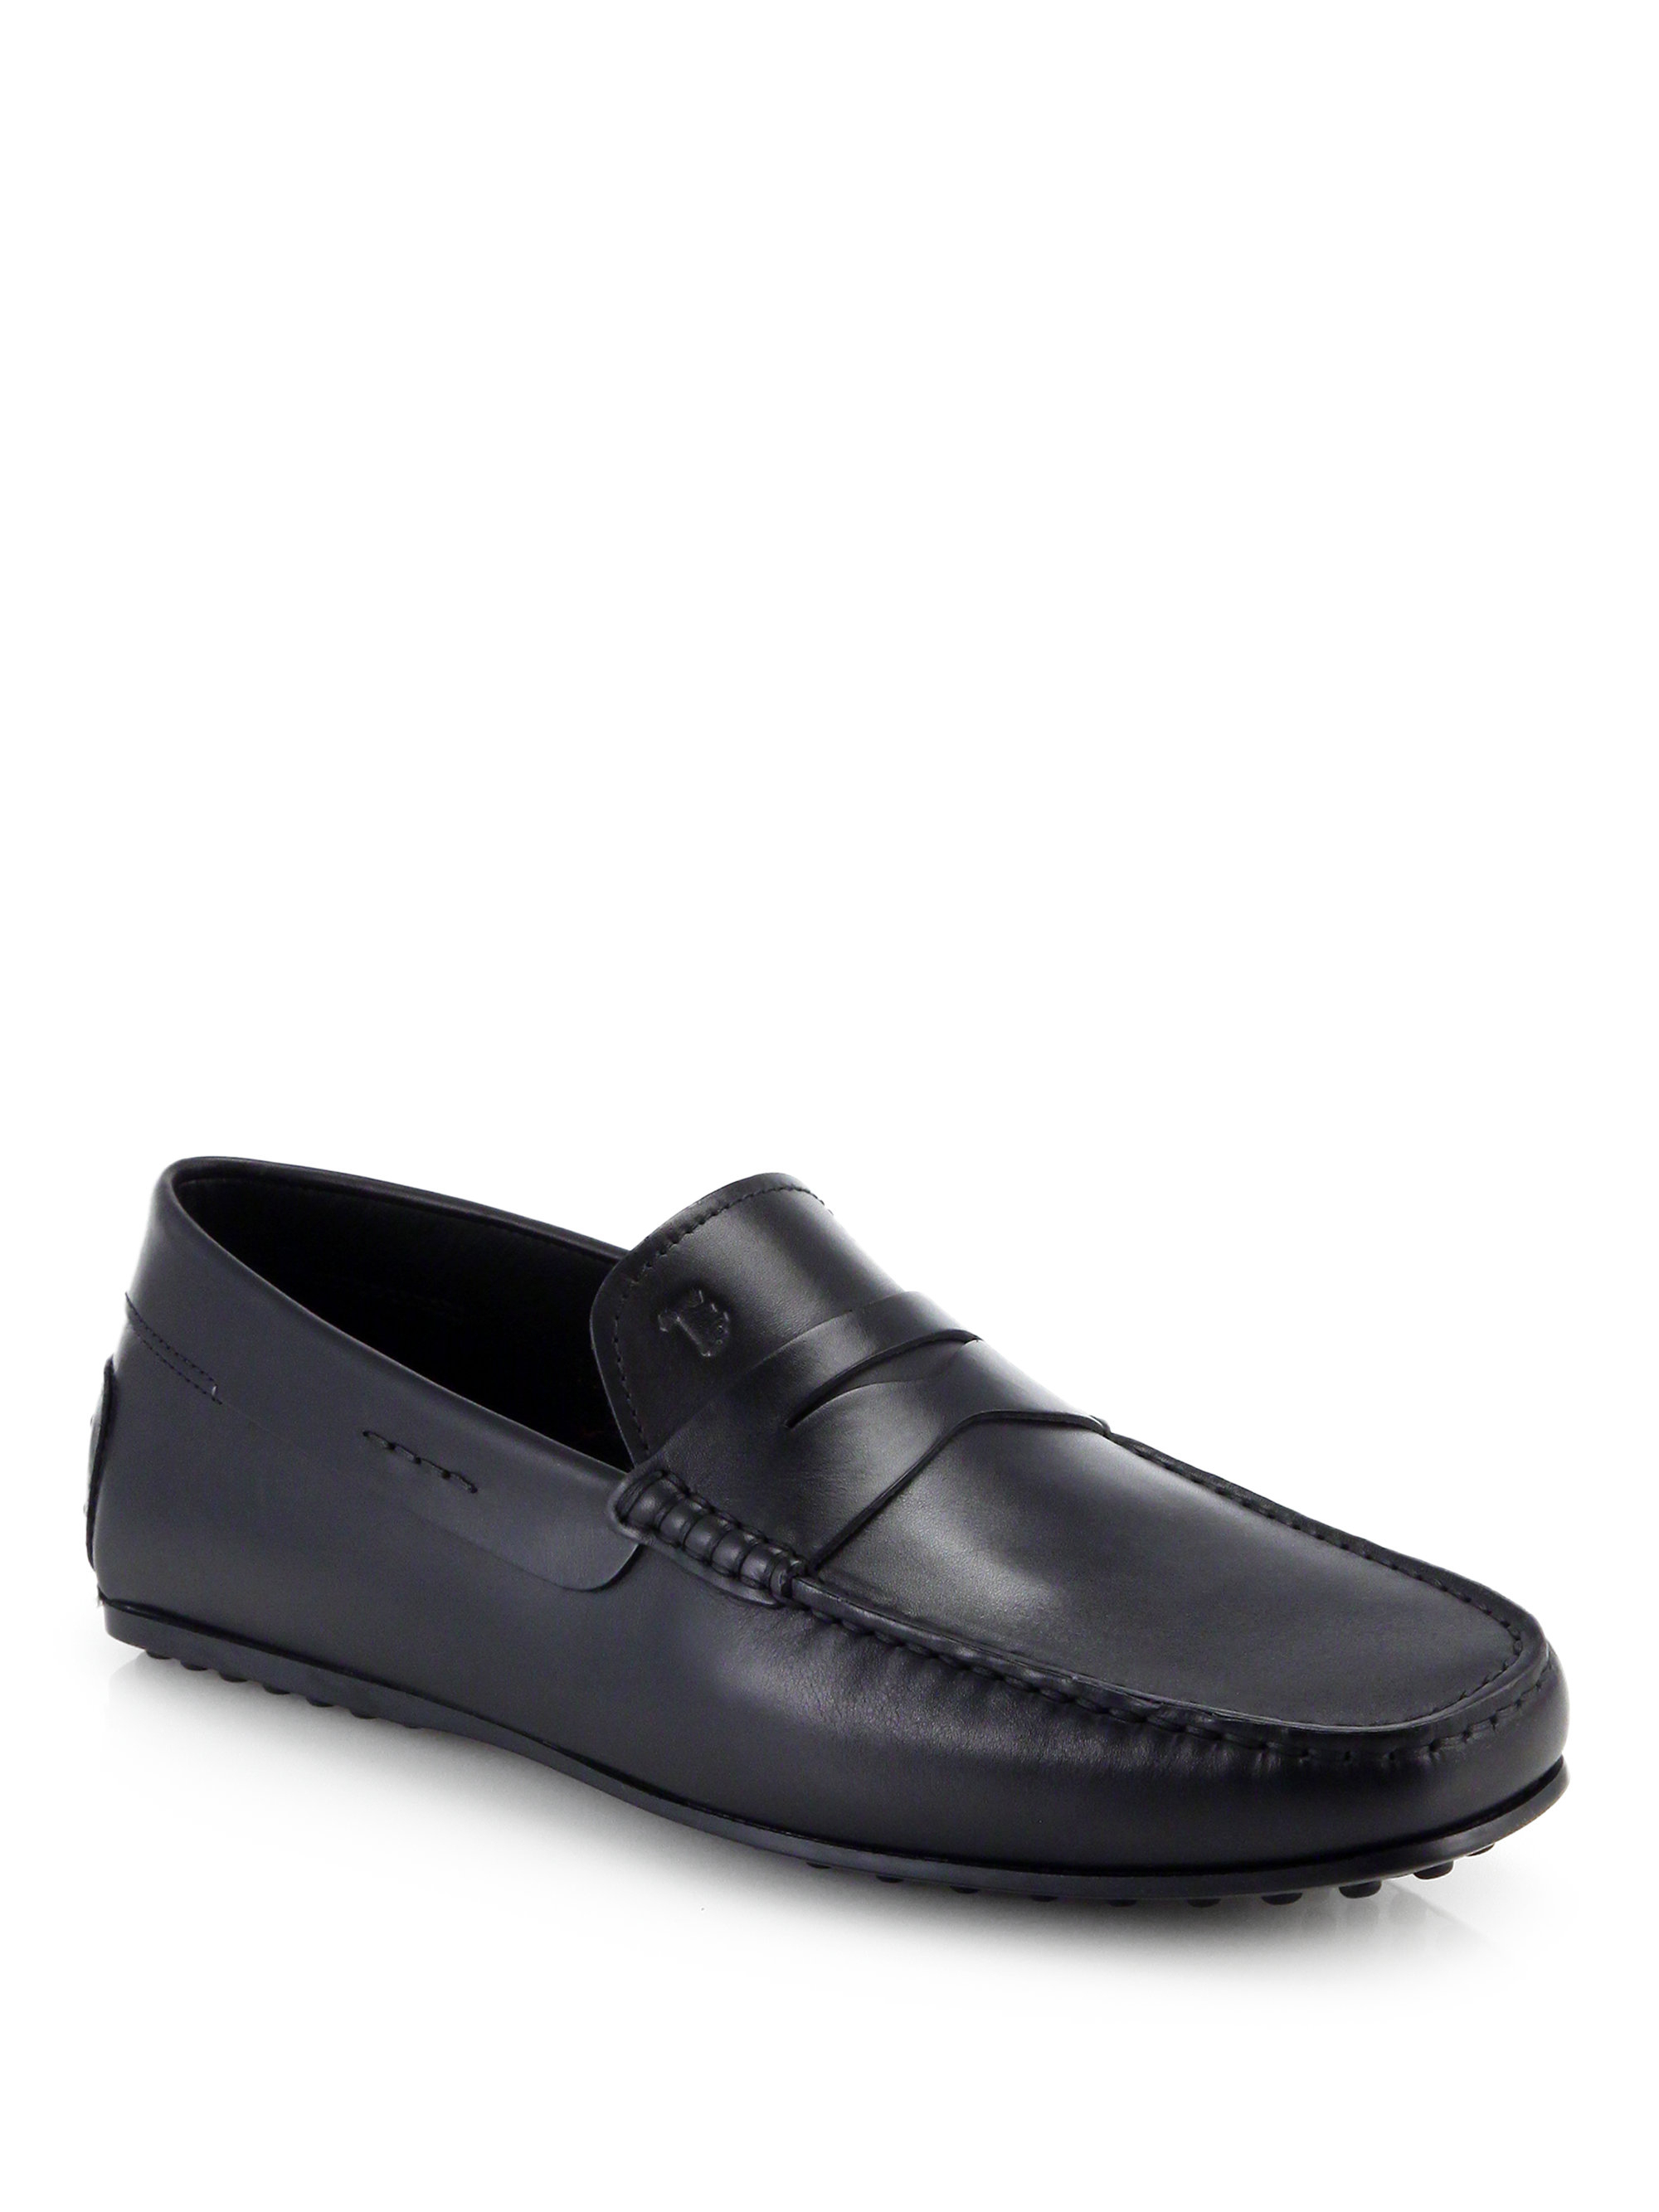 Lyst - Tod's City Gommino Loafers in Black for Men